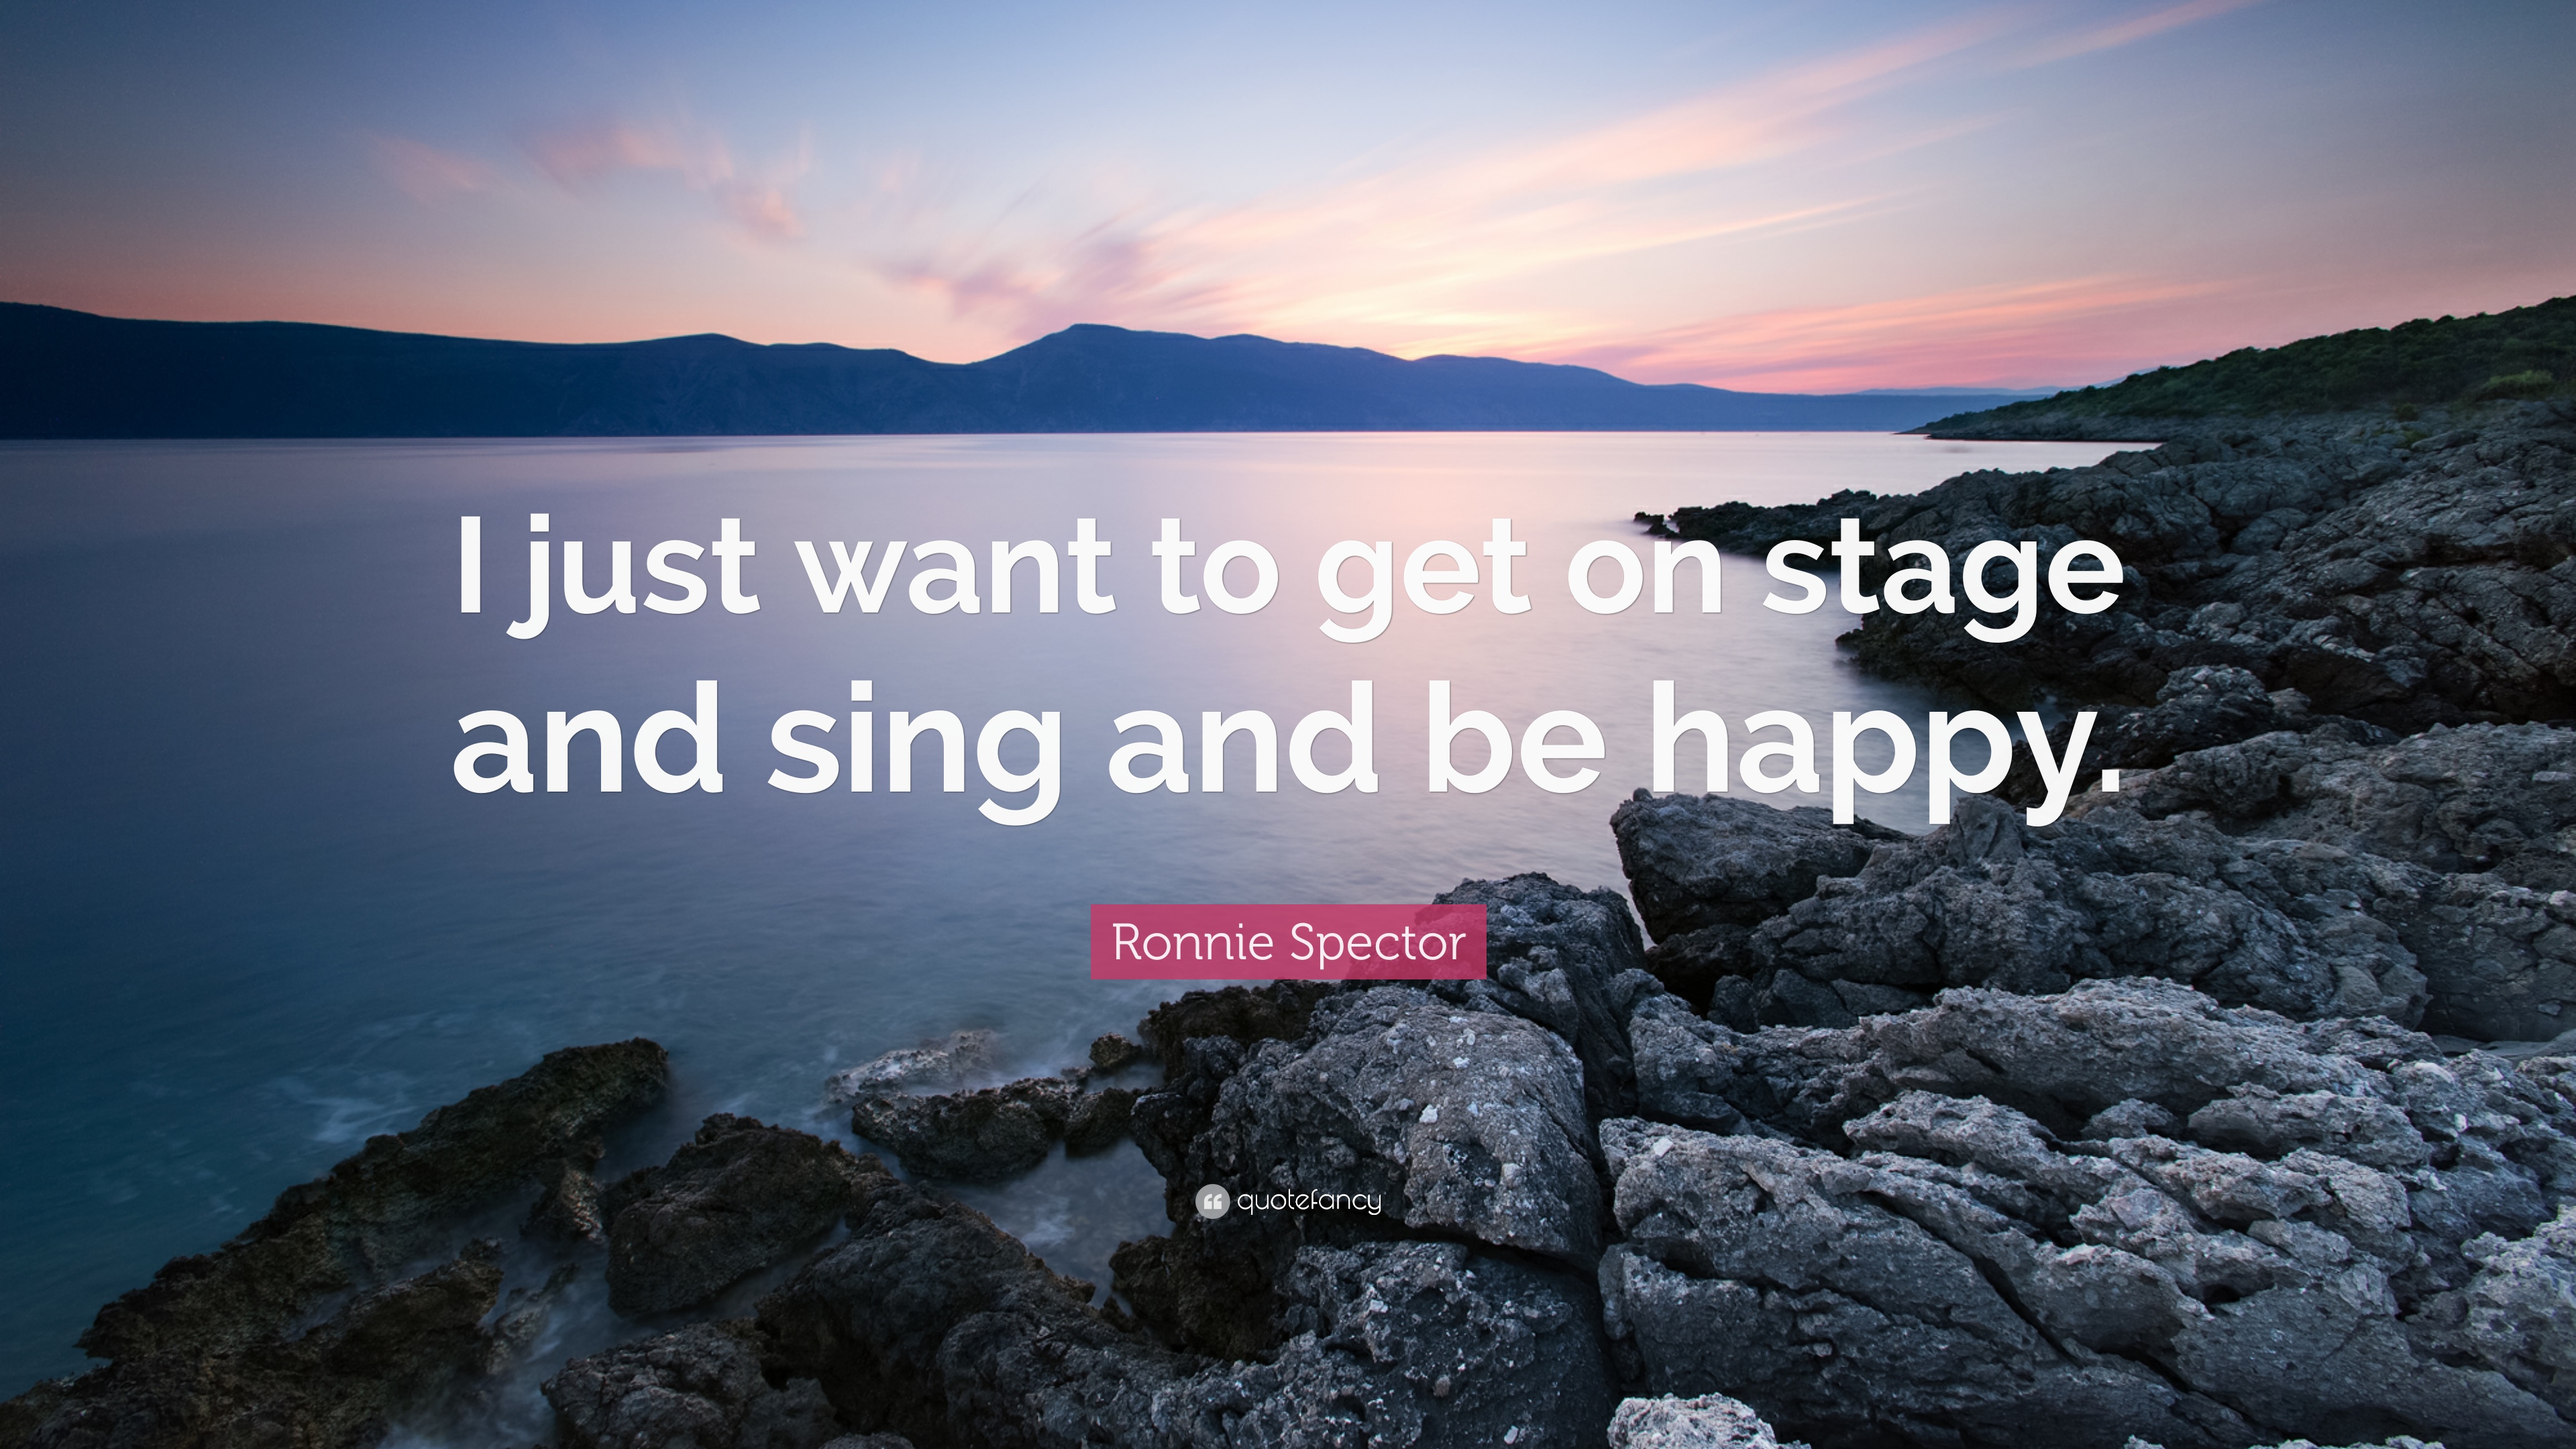 10 Best Ronnie Spector Quotes